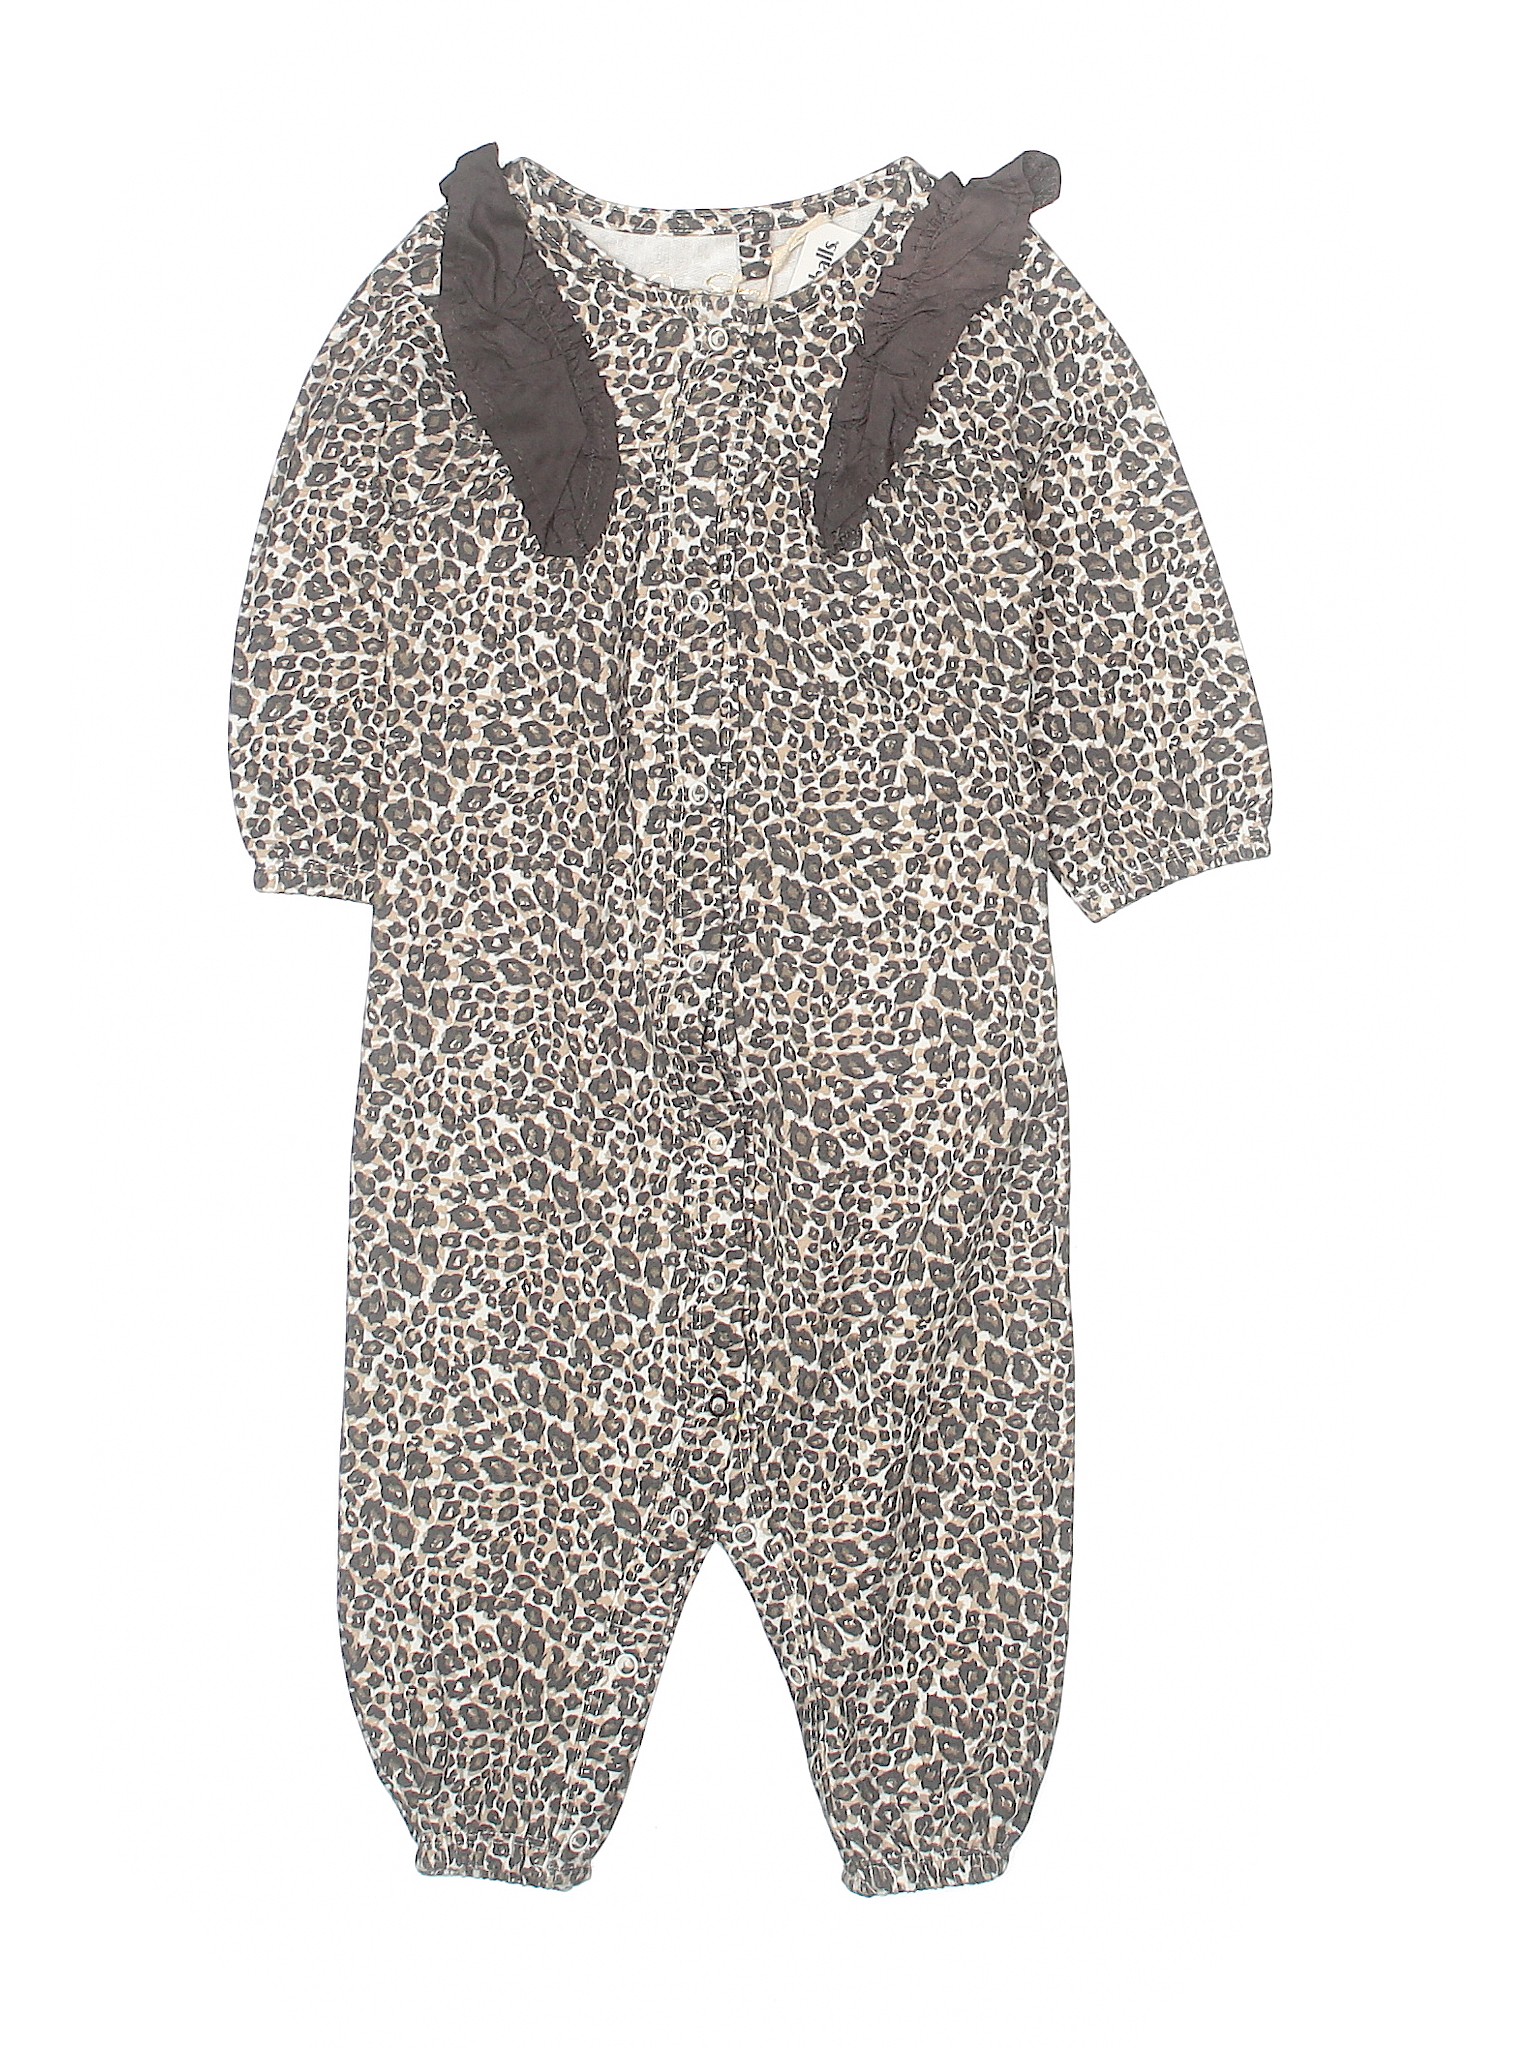 Jessica Simpson Baby Infant Girl's One Piece Coveralls Creeper 3/6 or 6/9 Months